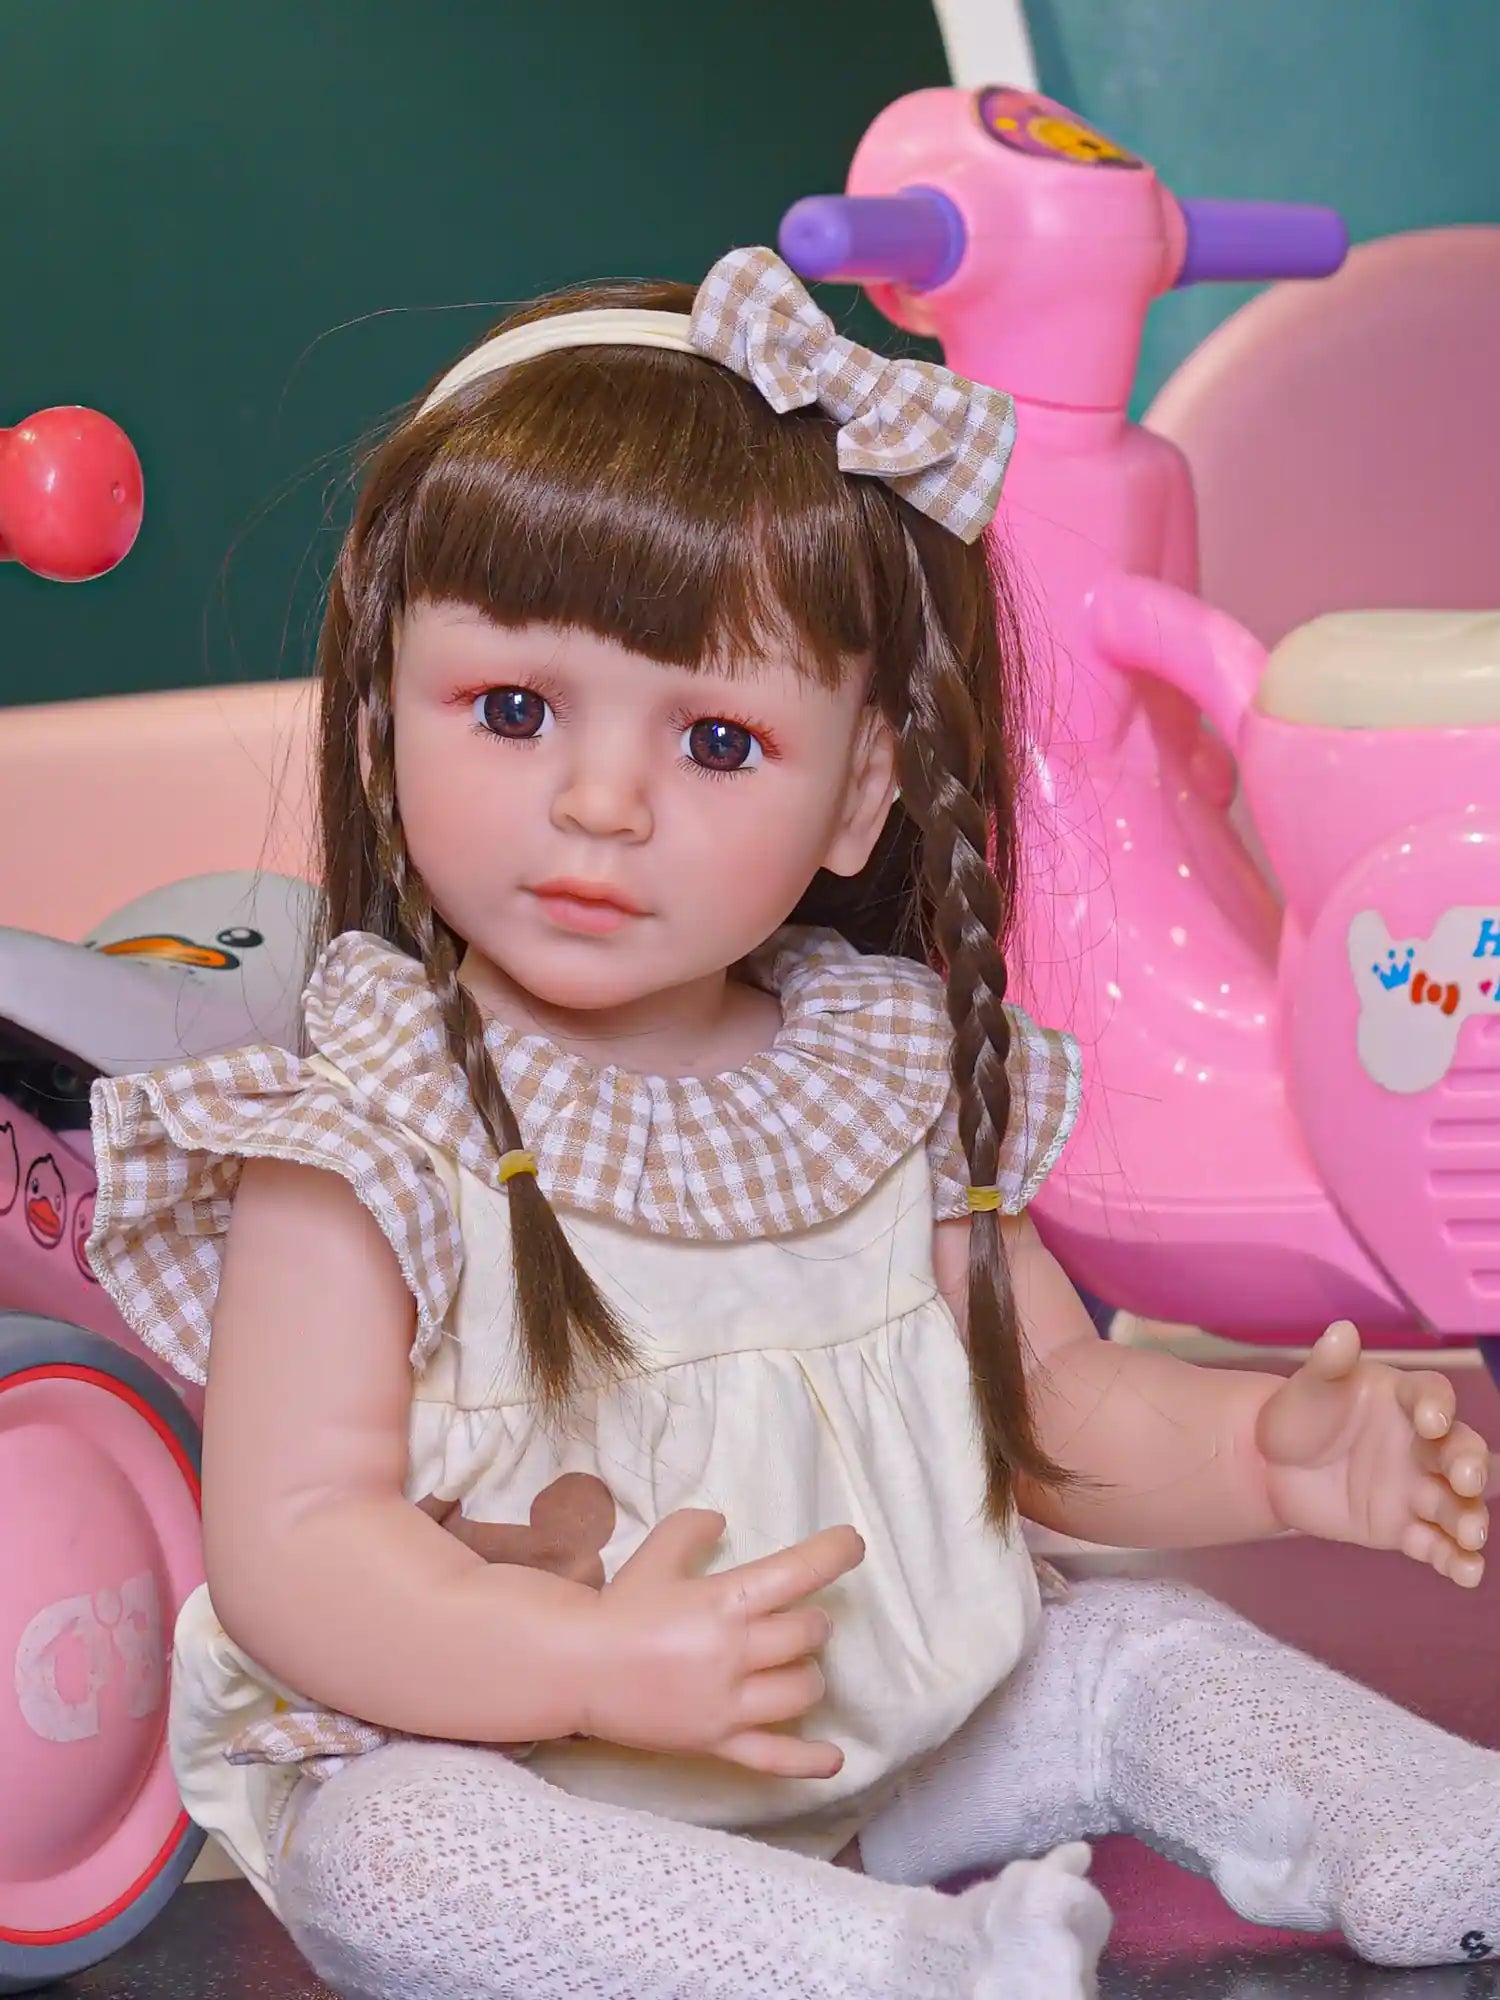 Close-up of a lifelike toddler doll with braided hair and a plaid hair bow, deep blue eyes, in a playful setting.